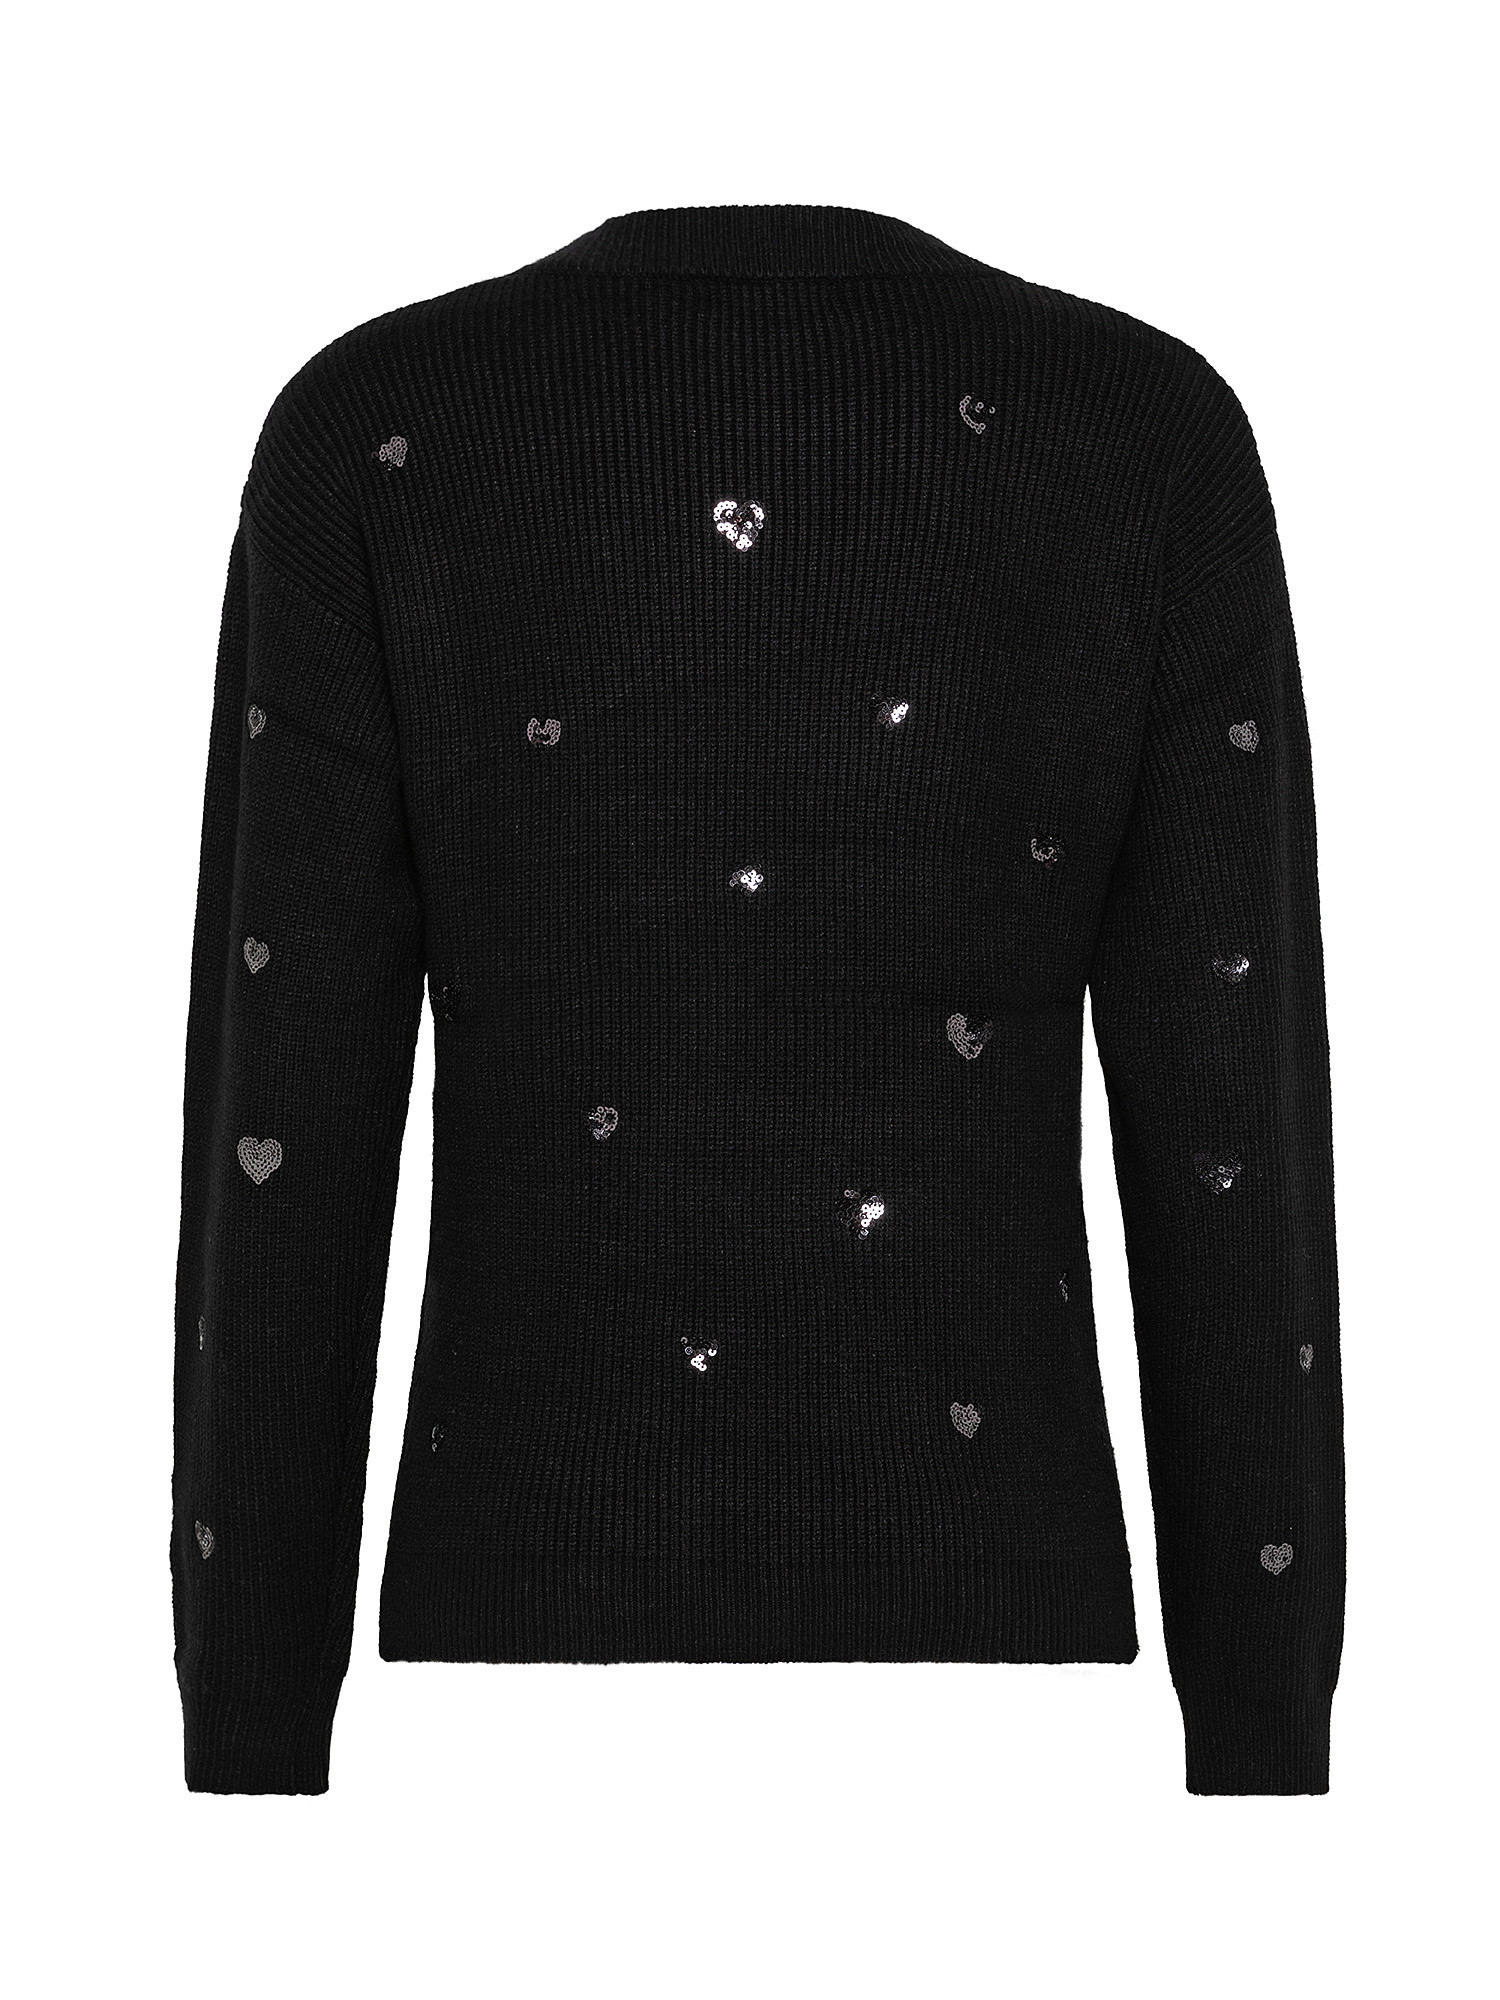 Sweater with sequined hearts, Black 1, large image number 1